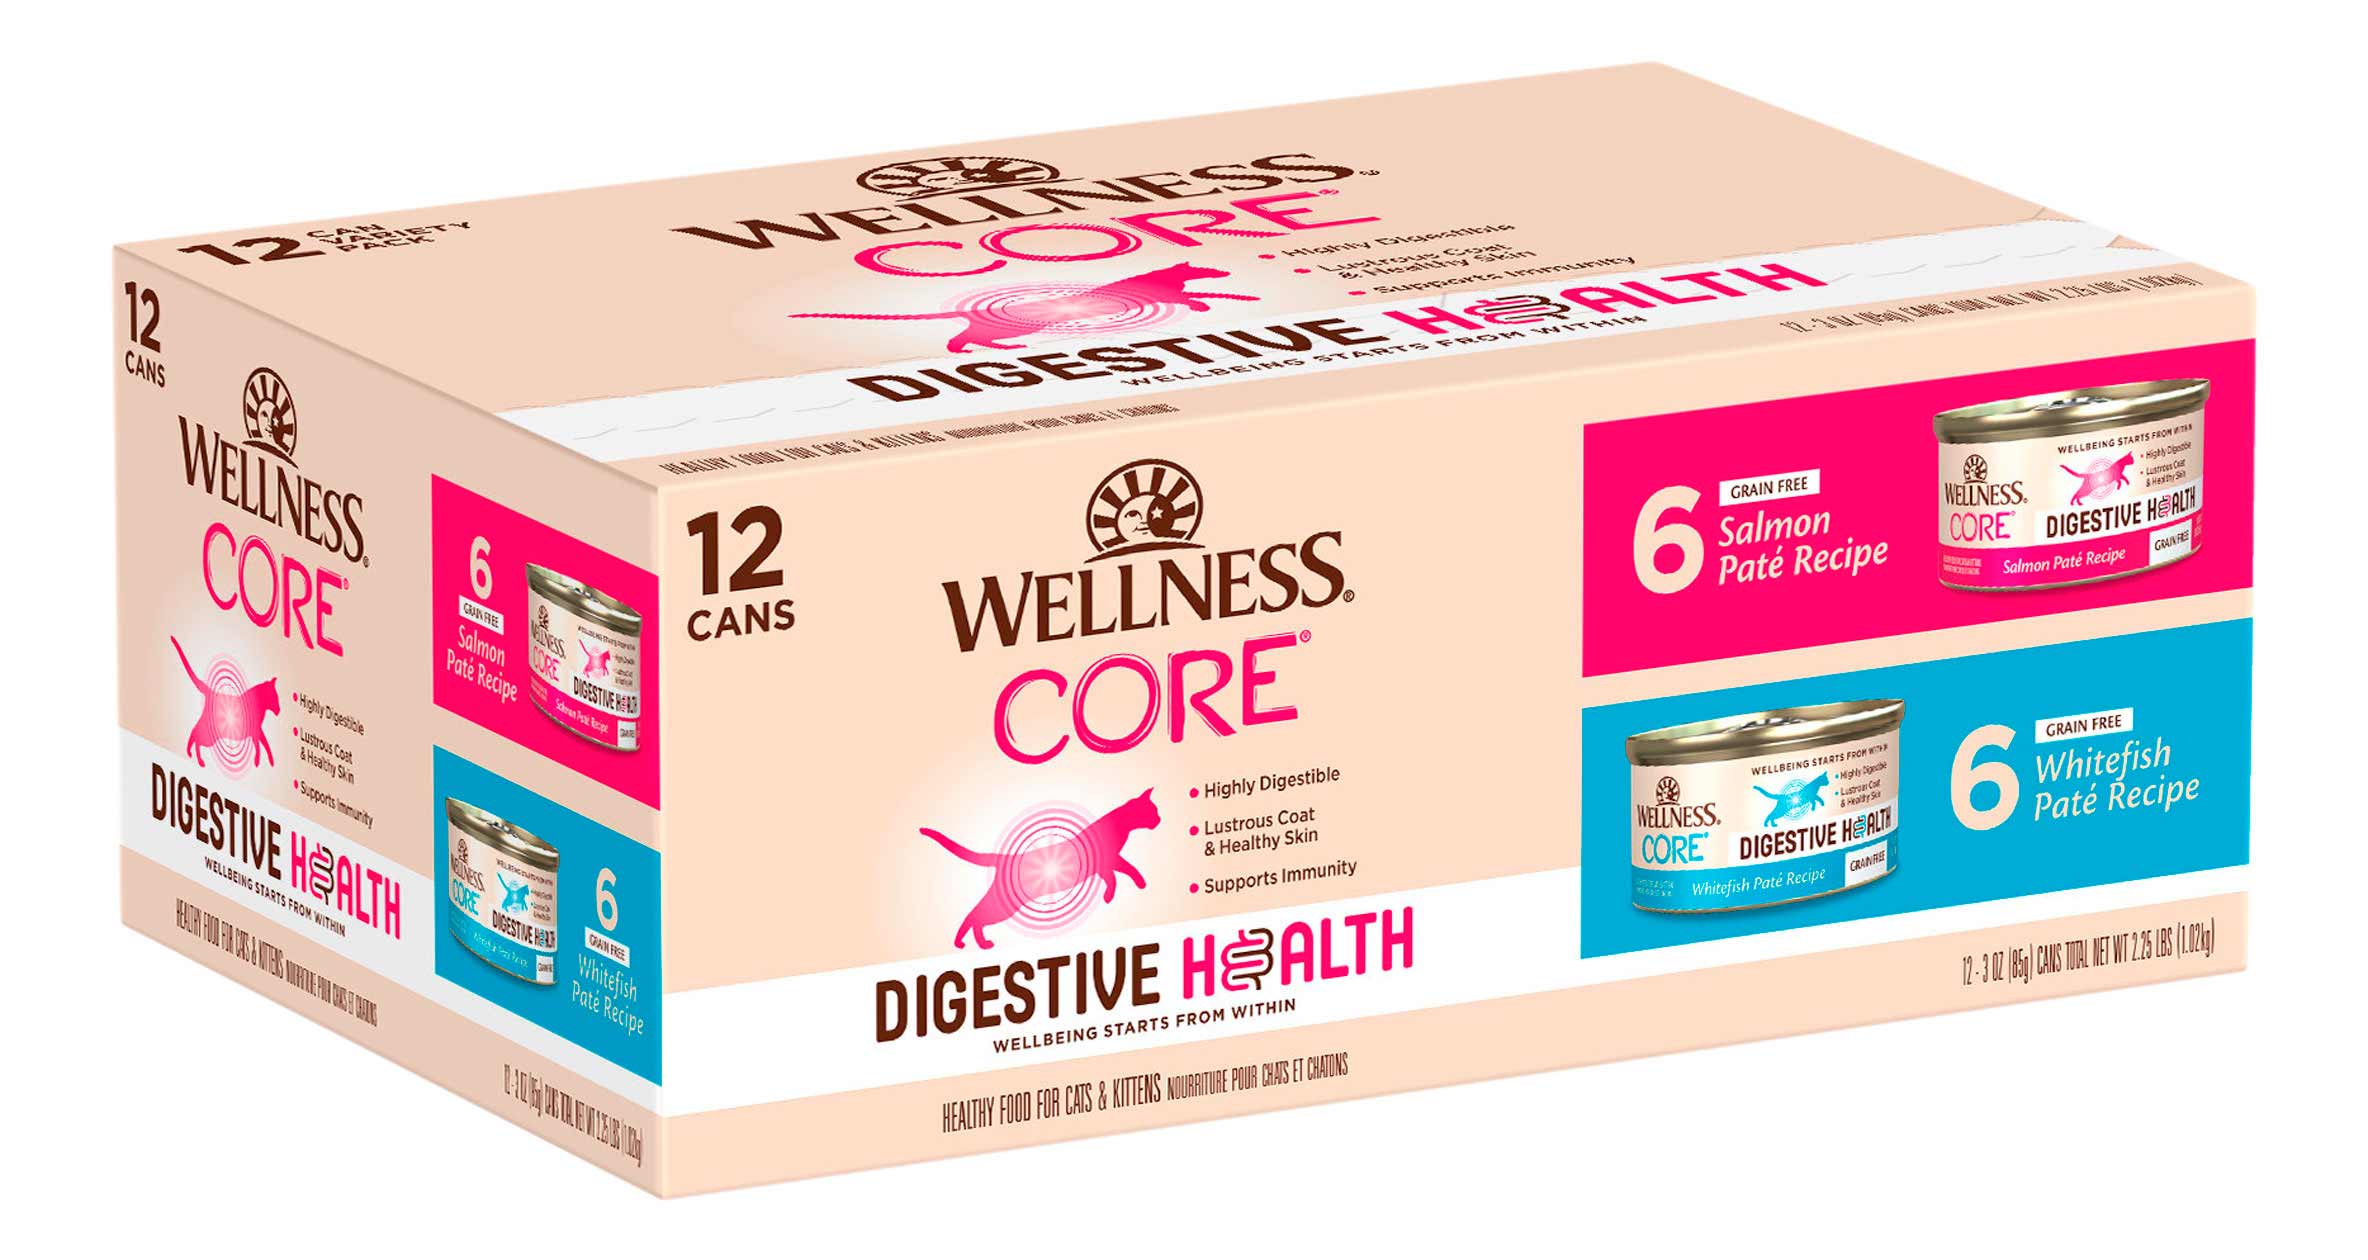 Wellnes CORE Digestive Health Salmon & Whitefish Pate Variety Pack Wet Cat Food, 3 Ounce Can (Pack of 12)